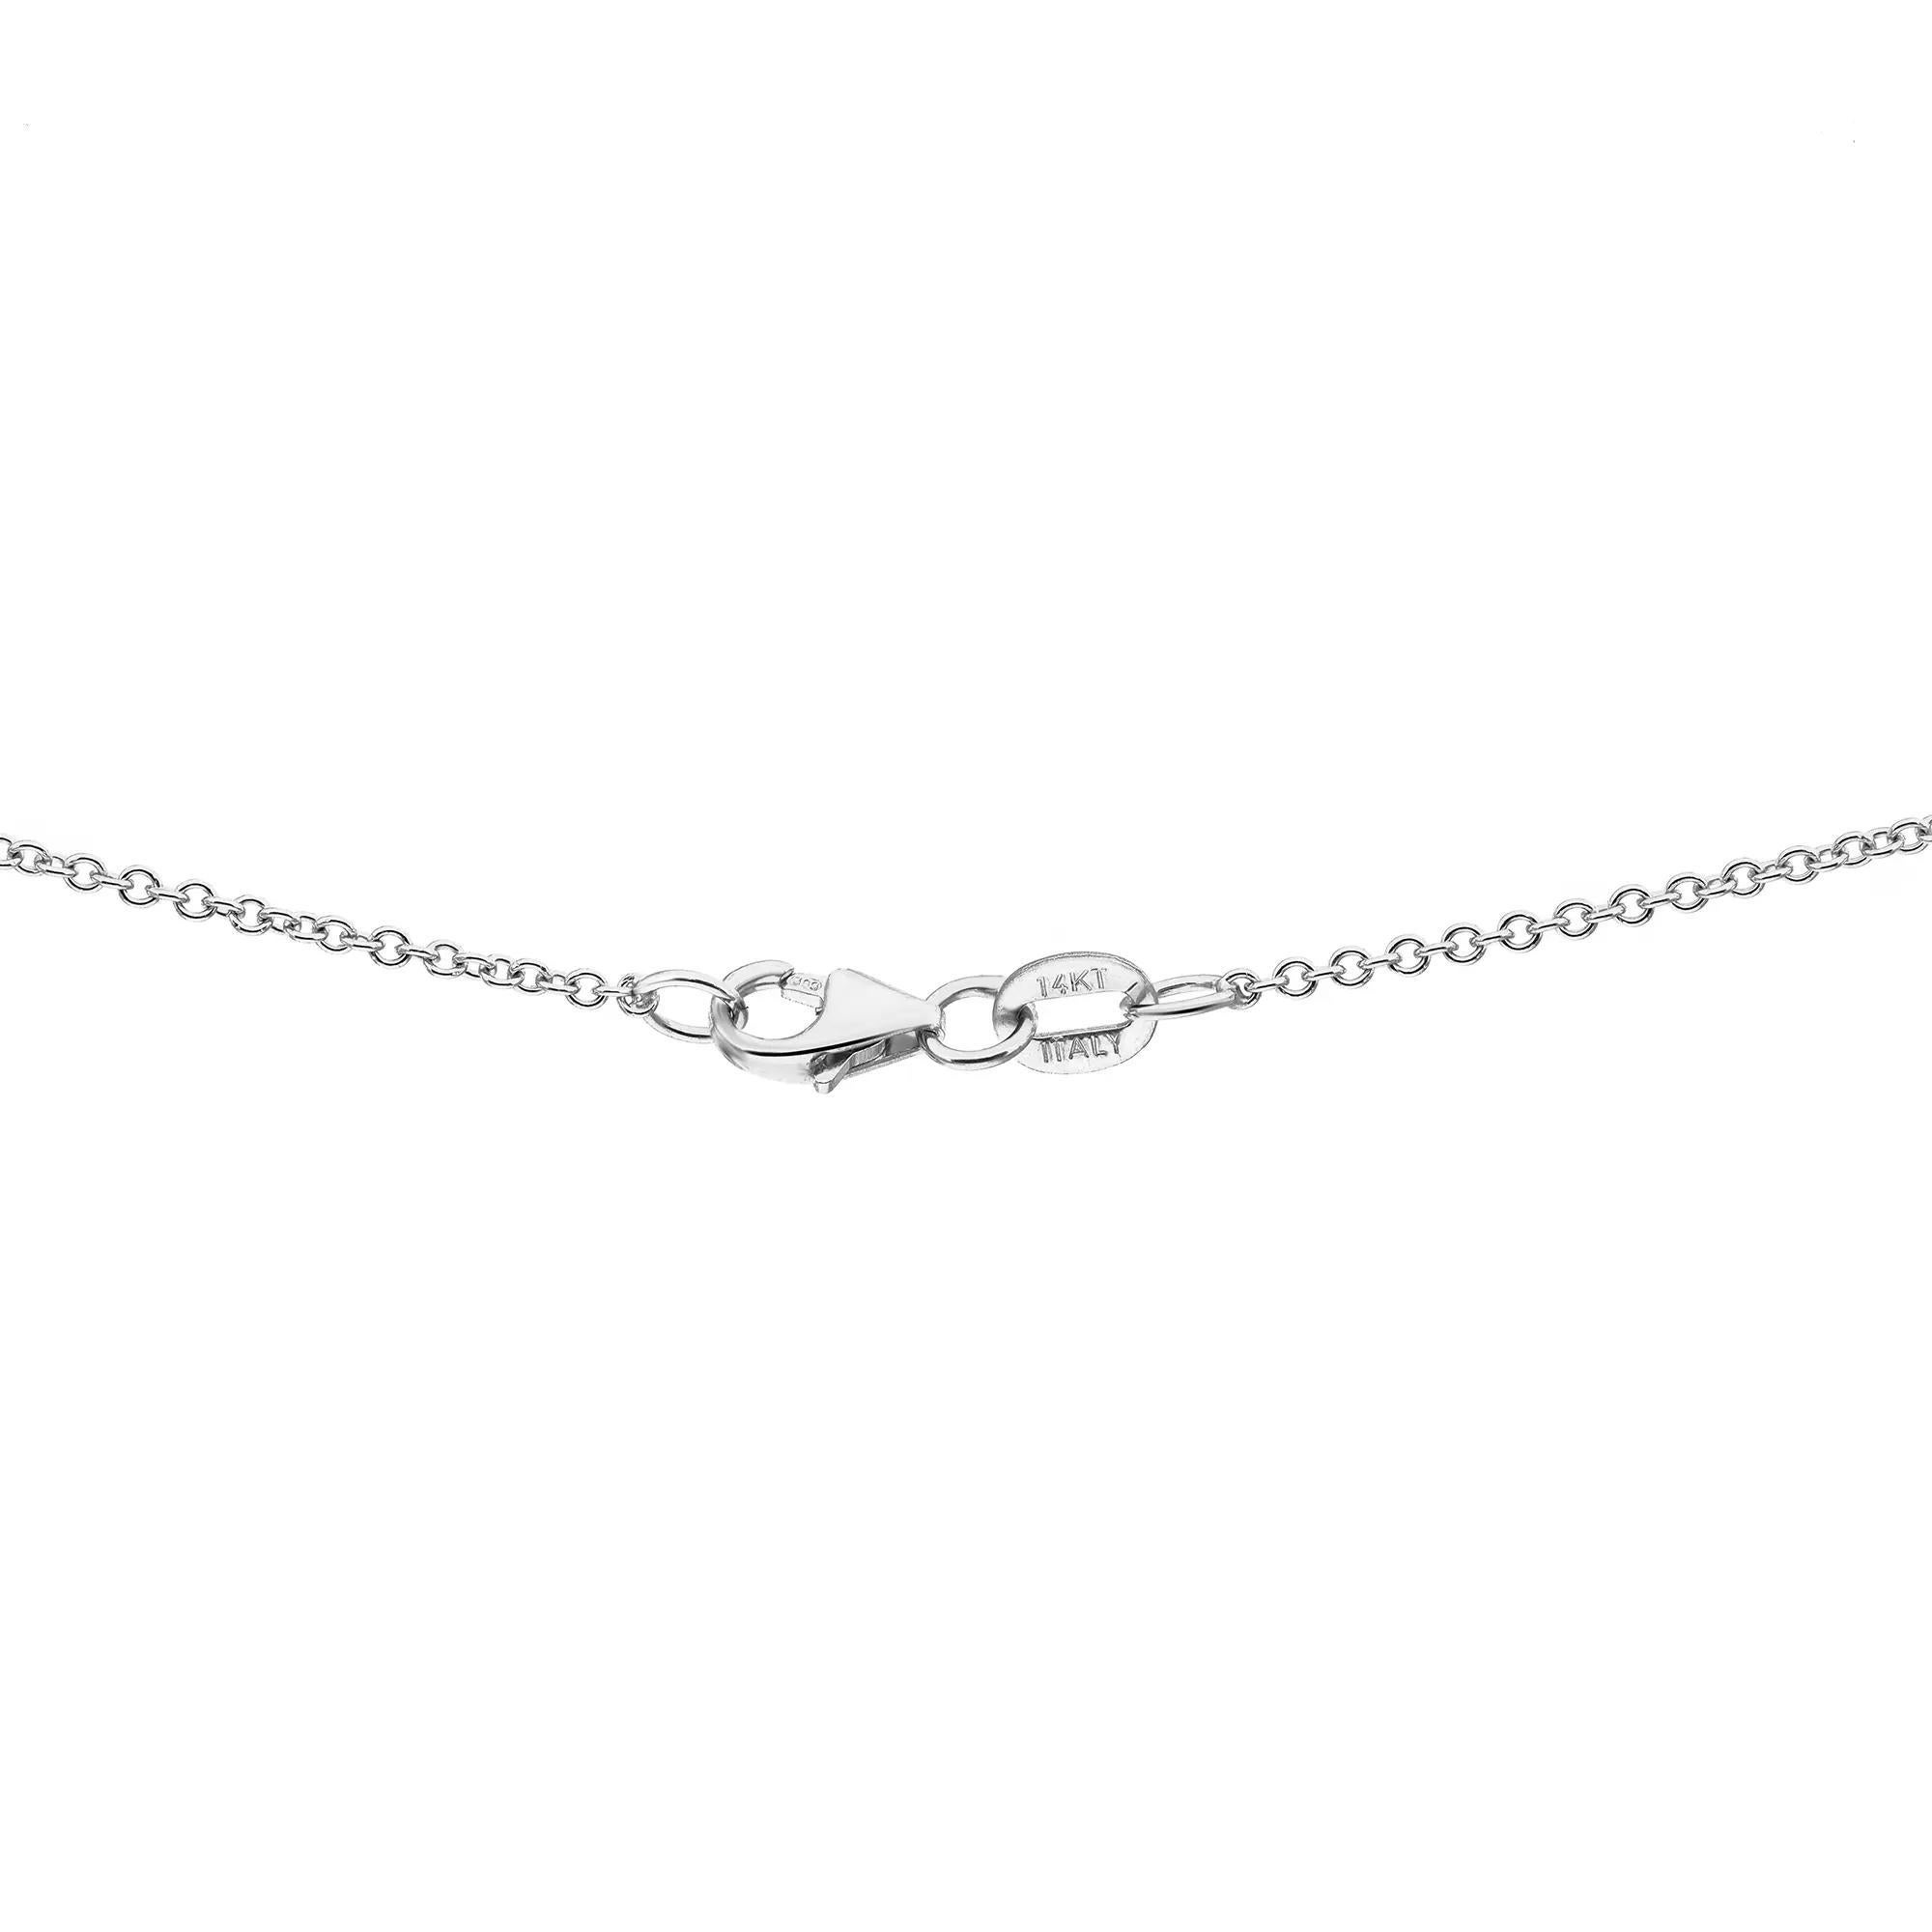 Baguette And Round Cut Diamond Pendant Necklace 14K White Gold 0.44Cttw In New Condition For Sale In New York, NY